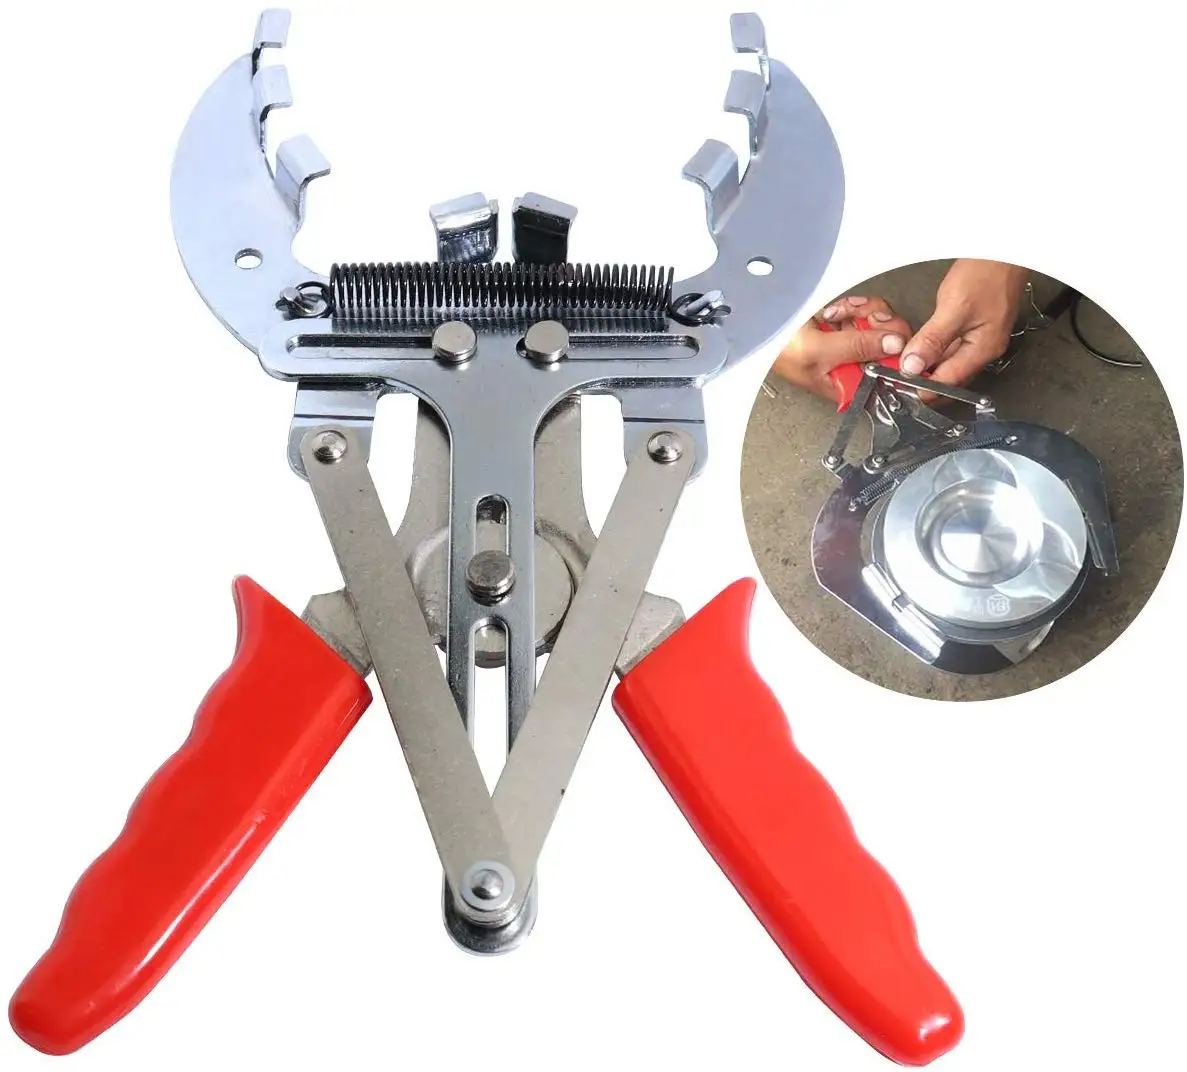 Piston Ring Pliers - TOPTUL The Mark of Professional Tools